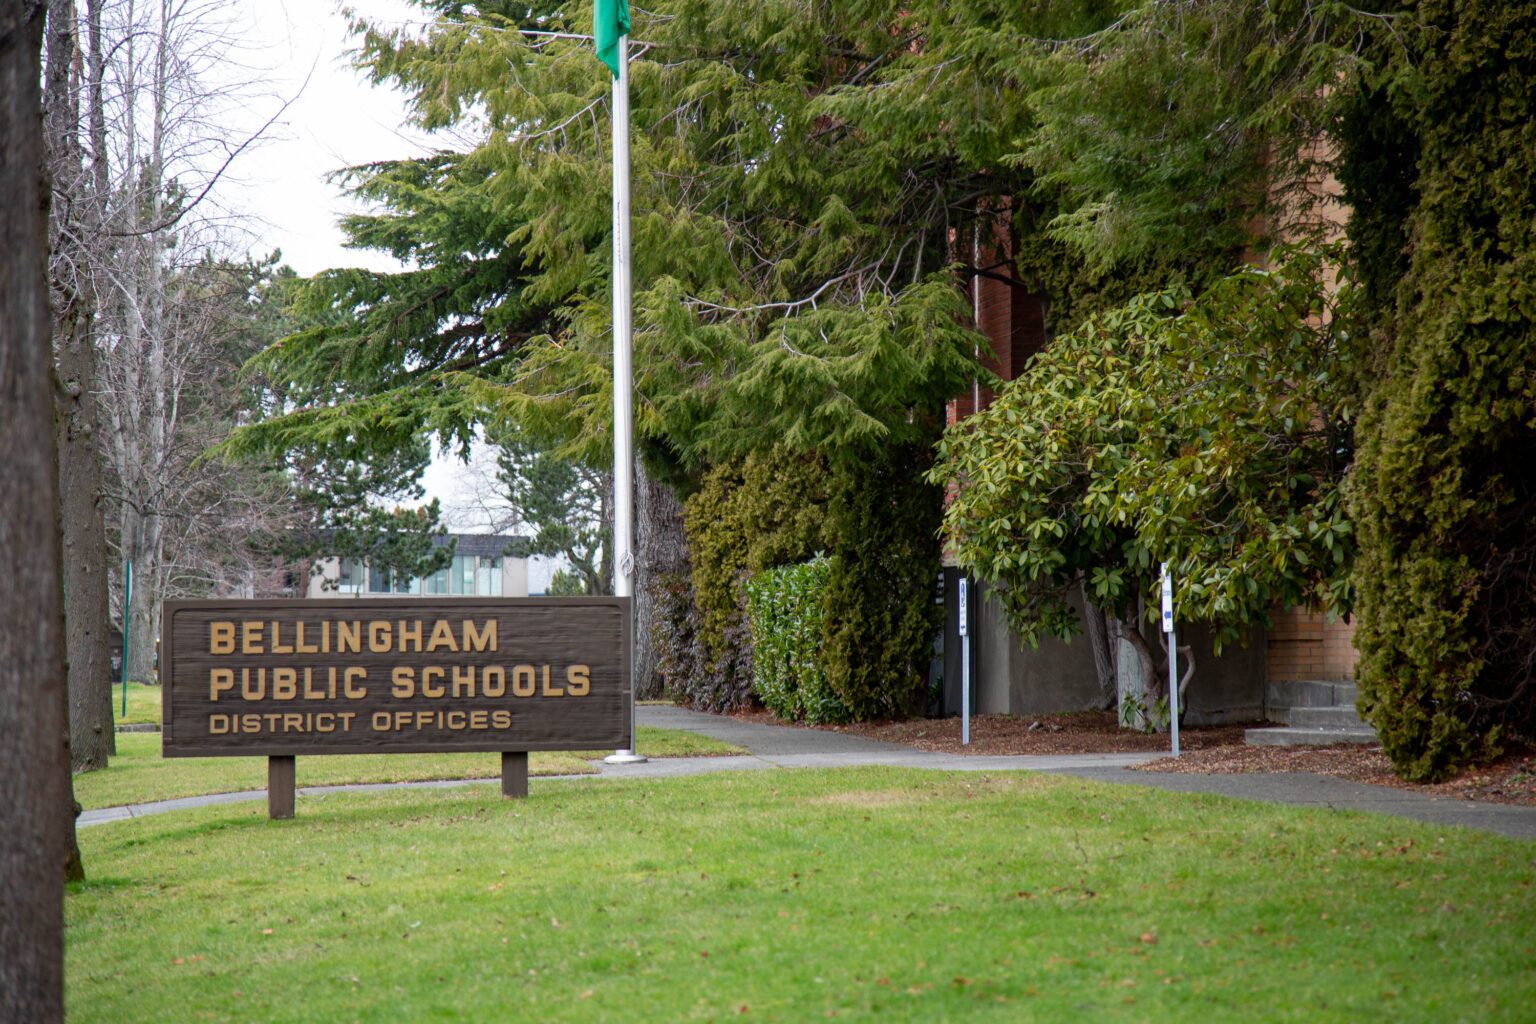 The Bellingham Public Schools board approved a budget of $213 million in revenue and $219 million in expenditures.